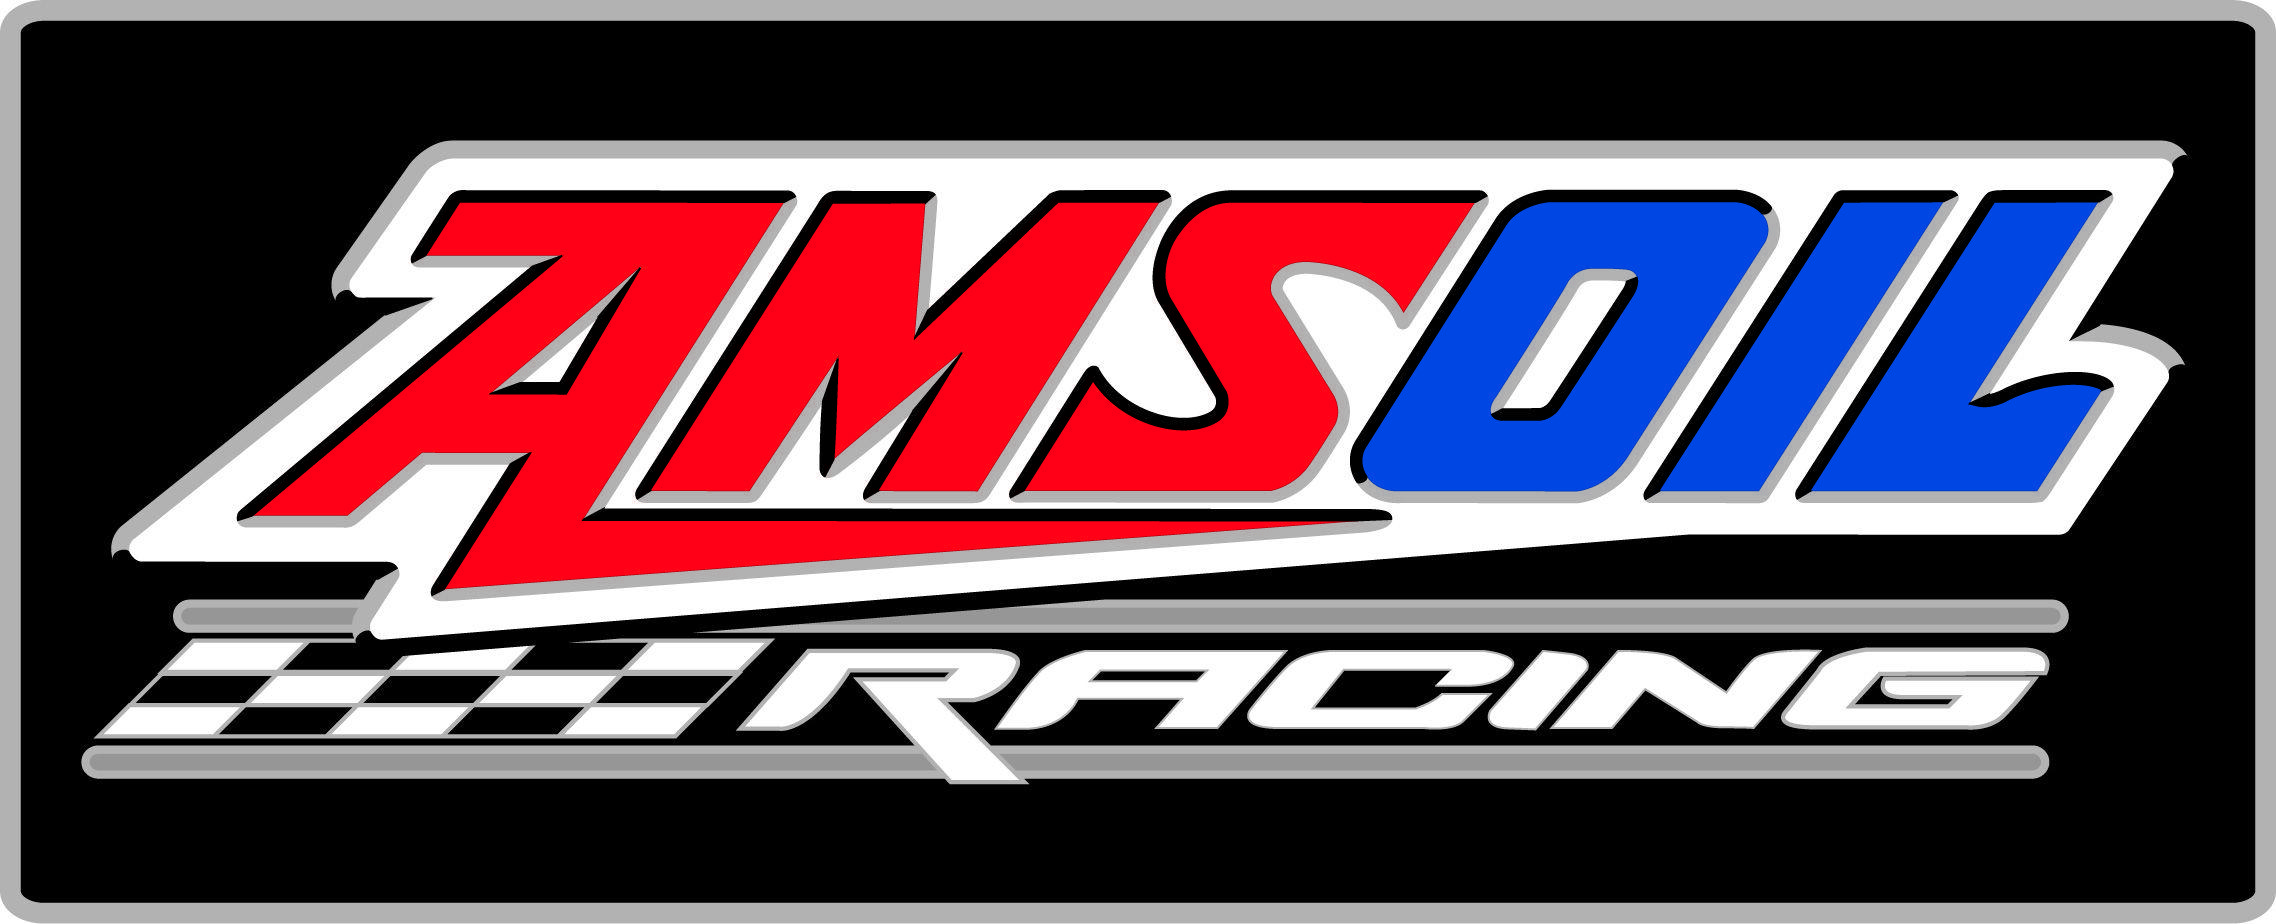 AMSOIL Logo - Pin by SyntheticOilandFilter on AMSOIL Synthetic 2 Stroke Oil ...